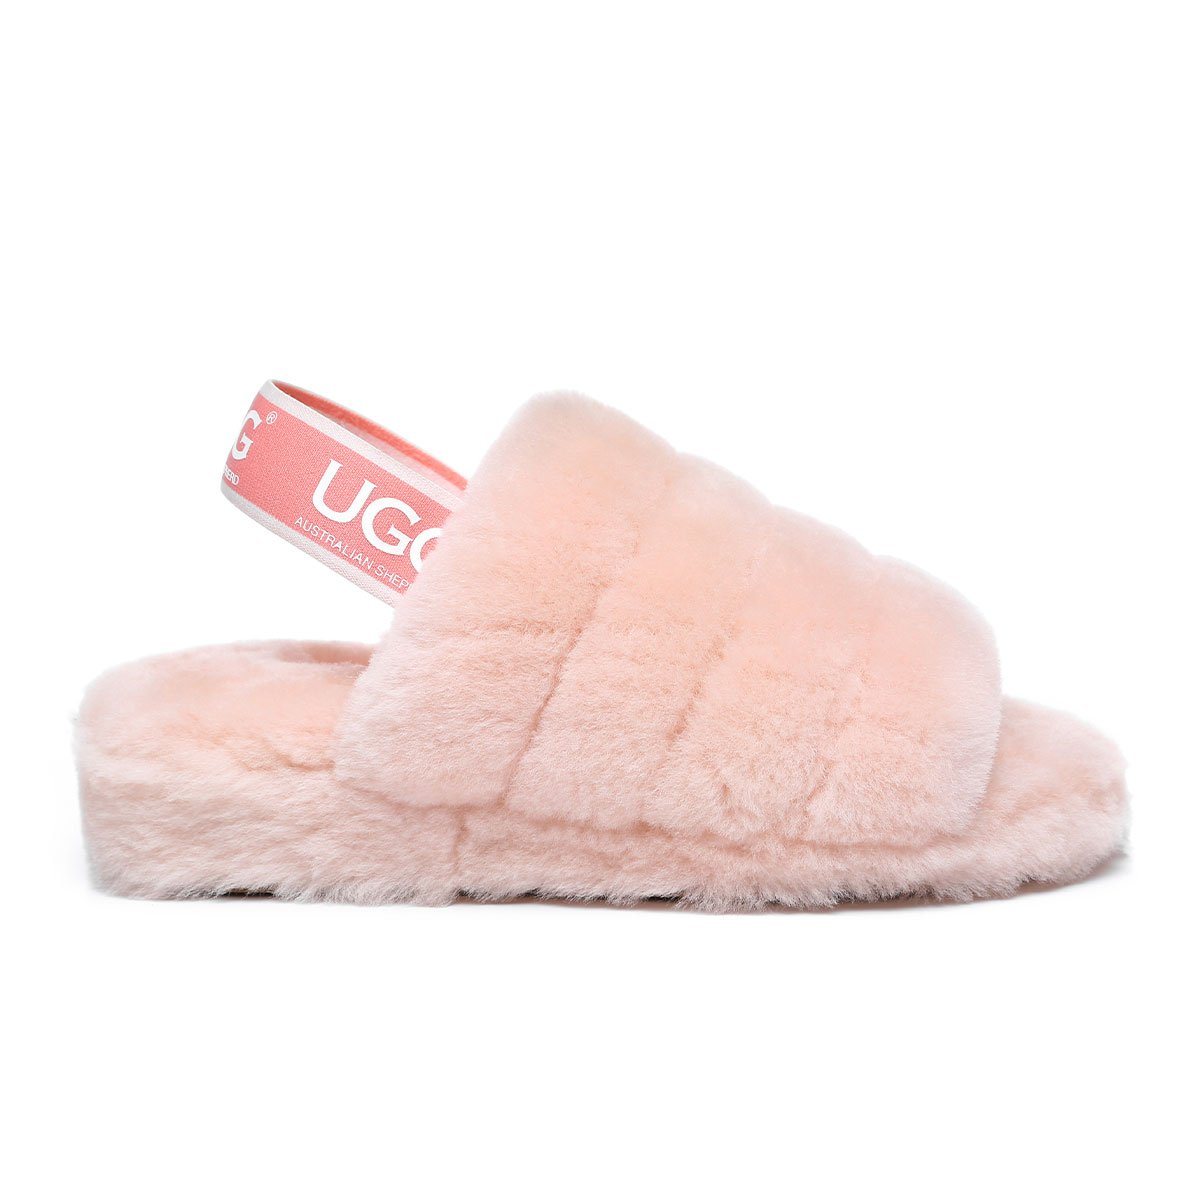 UGG Scuffette Sheepskin and Suede Slippers, Black at John Lewis & Partners